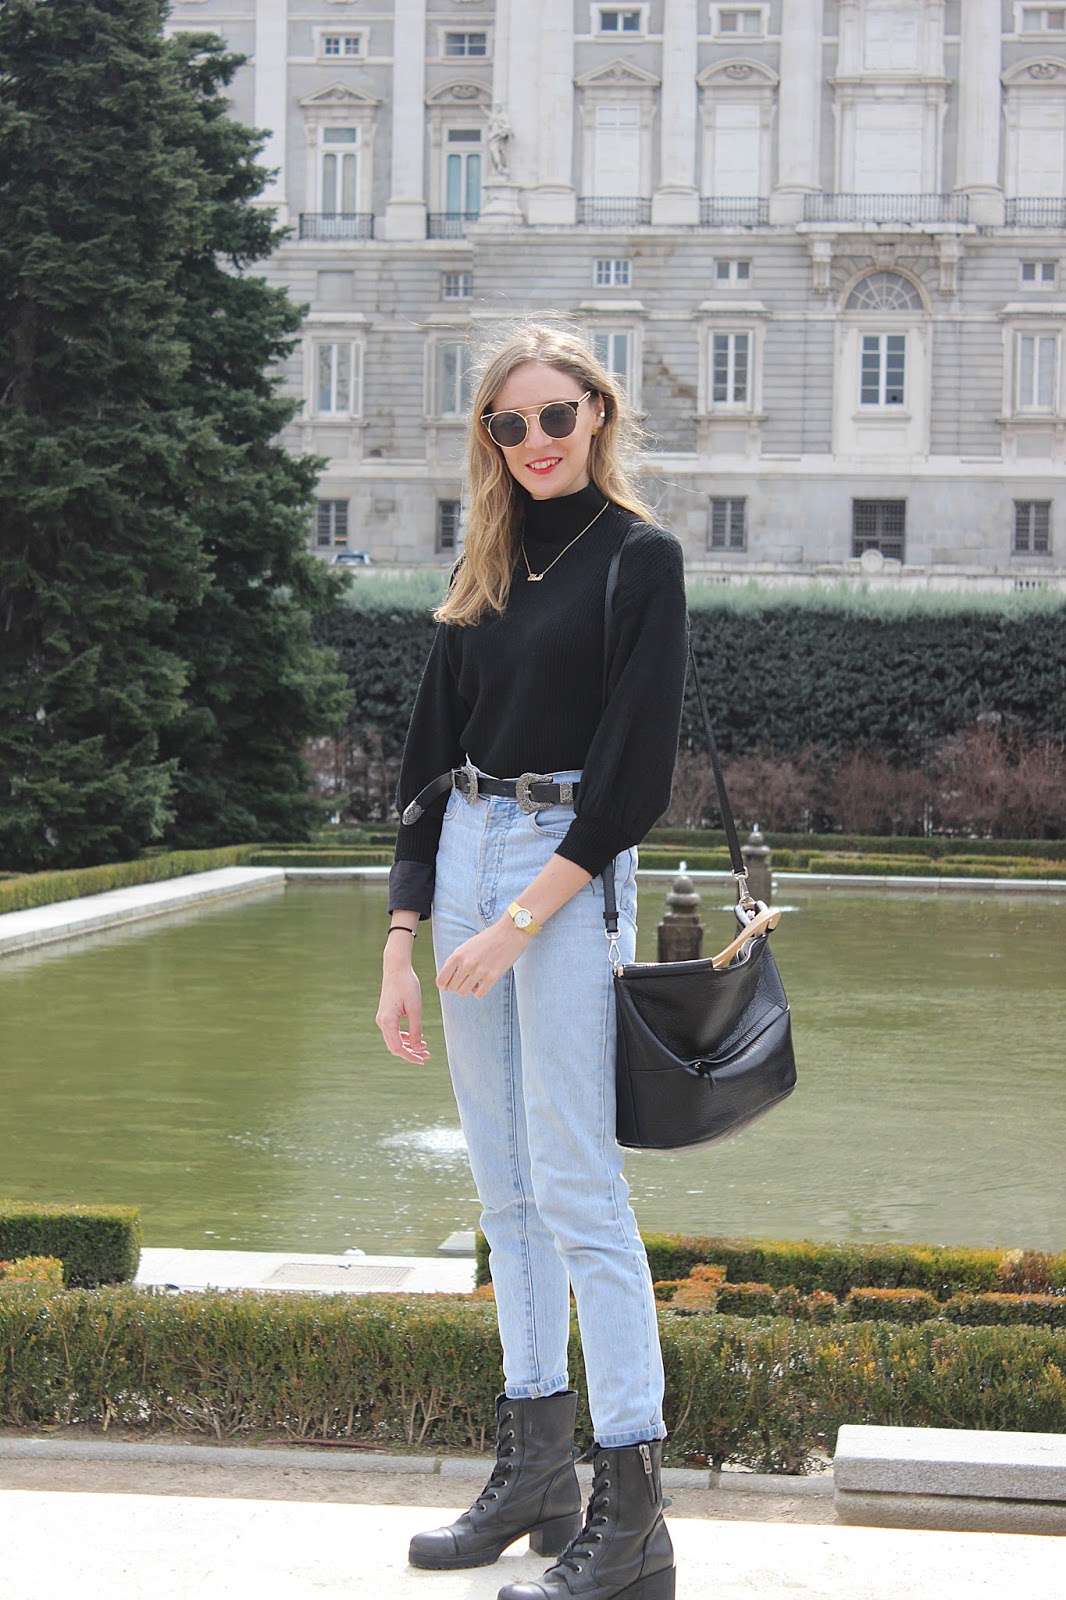 street-style-mom-jeans-militar-guess-boots-tblack-turtle-neck-zaful